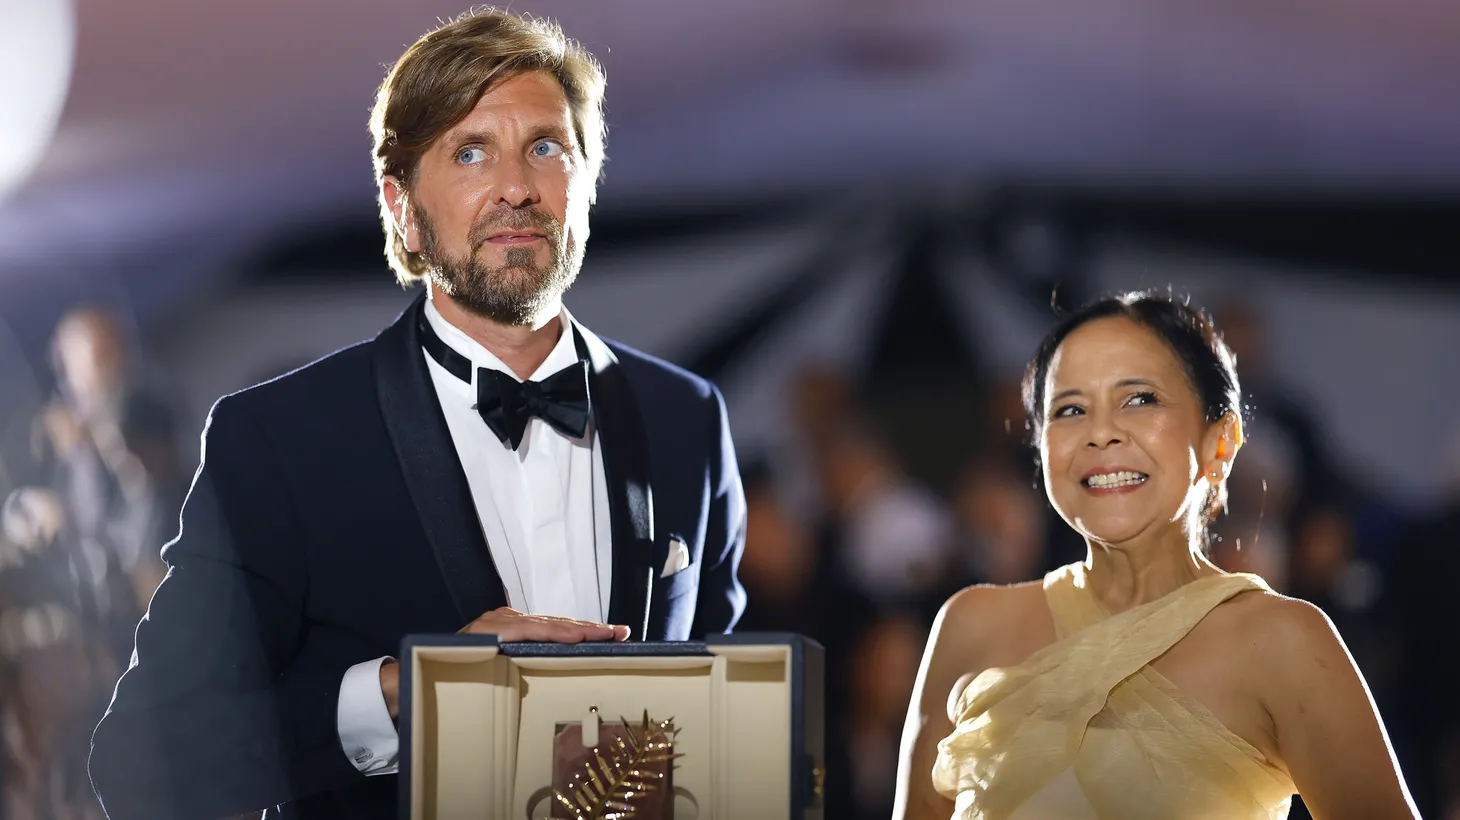 Director Ruben Östlund and actress Dolly De Leon pose with a Palme d'Or award for the film “Triangle of Sadness” at the 75th Cannes Film Festival’s closing ceremony on May 28, 2022.